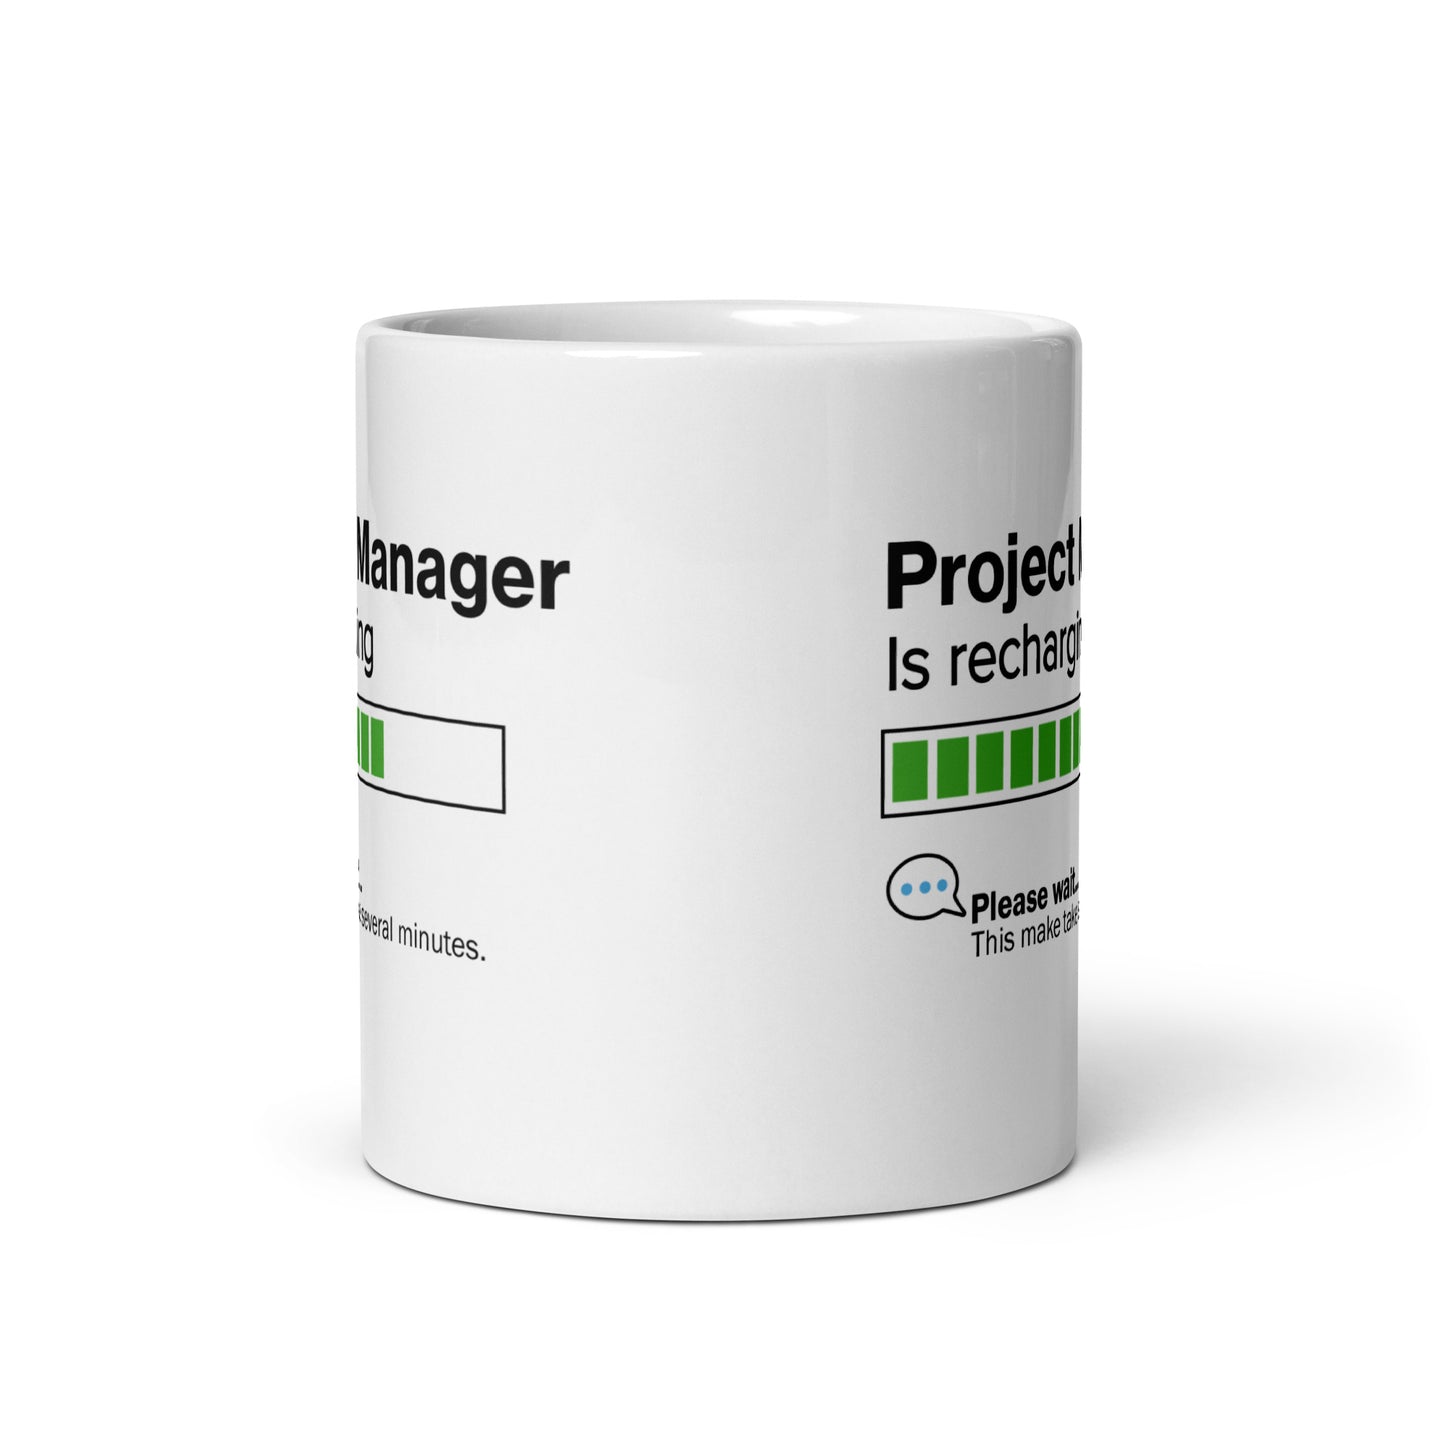 Project Manager Is Recharging Mug - 11oz - Great Gift for Project Managers